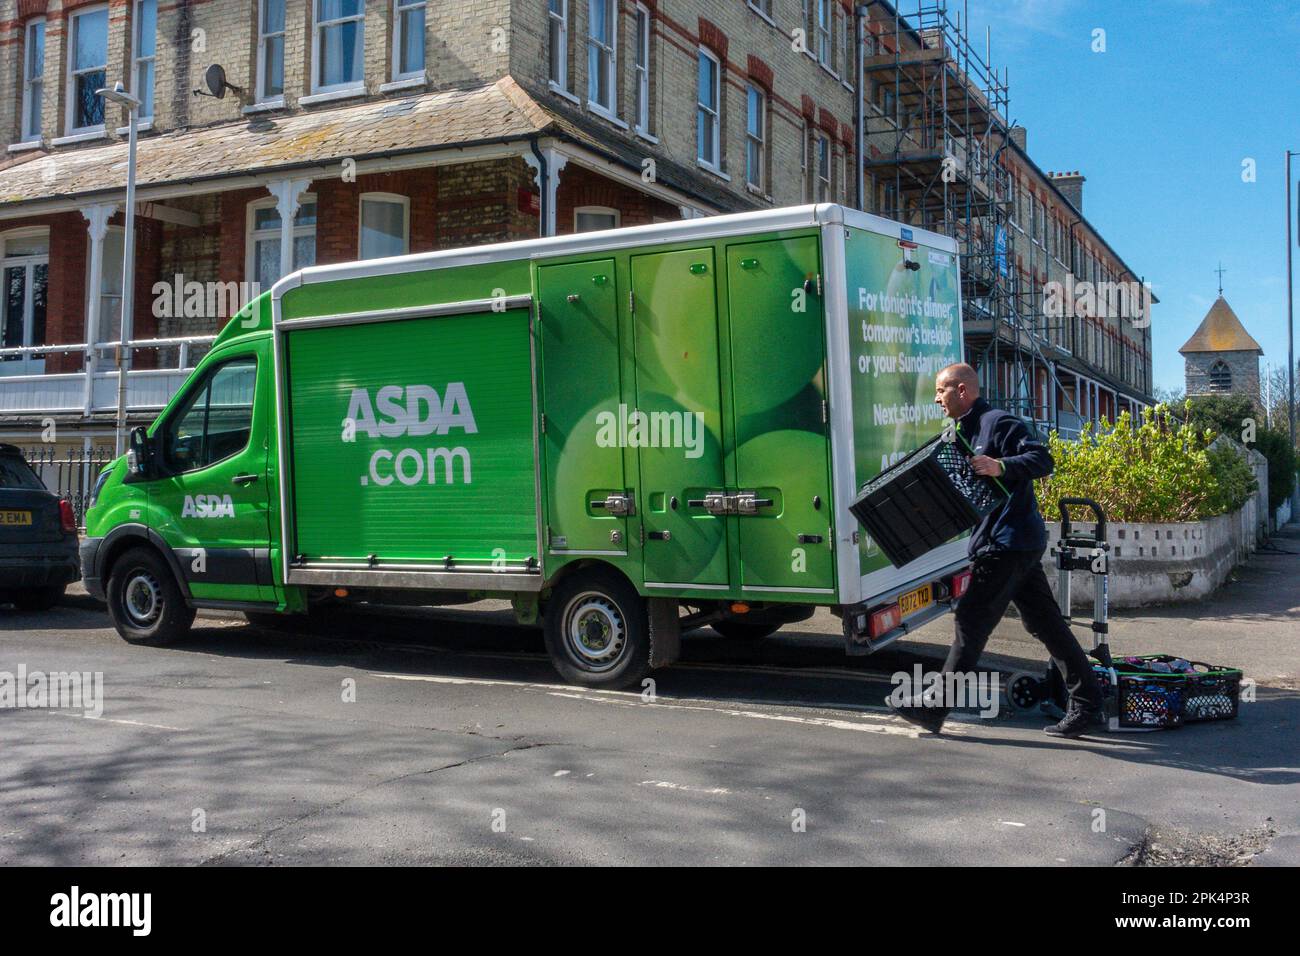 ASDA,Home Delivery,Van,Man,Driver,Food Delivery Stock Photo